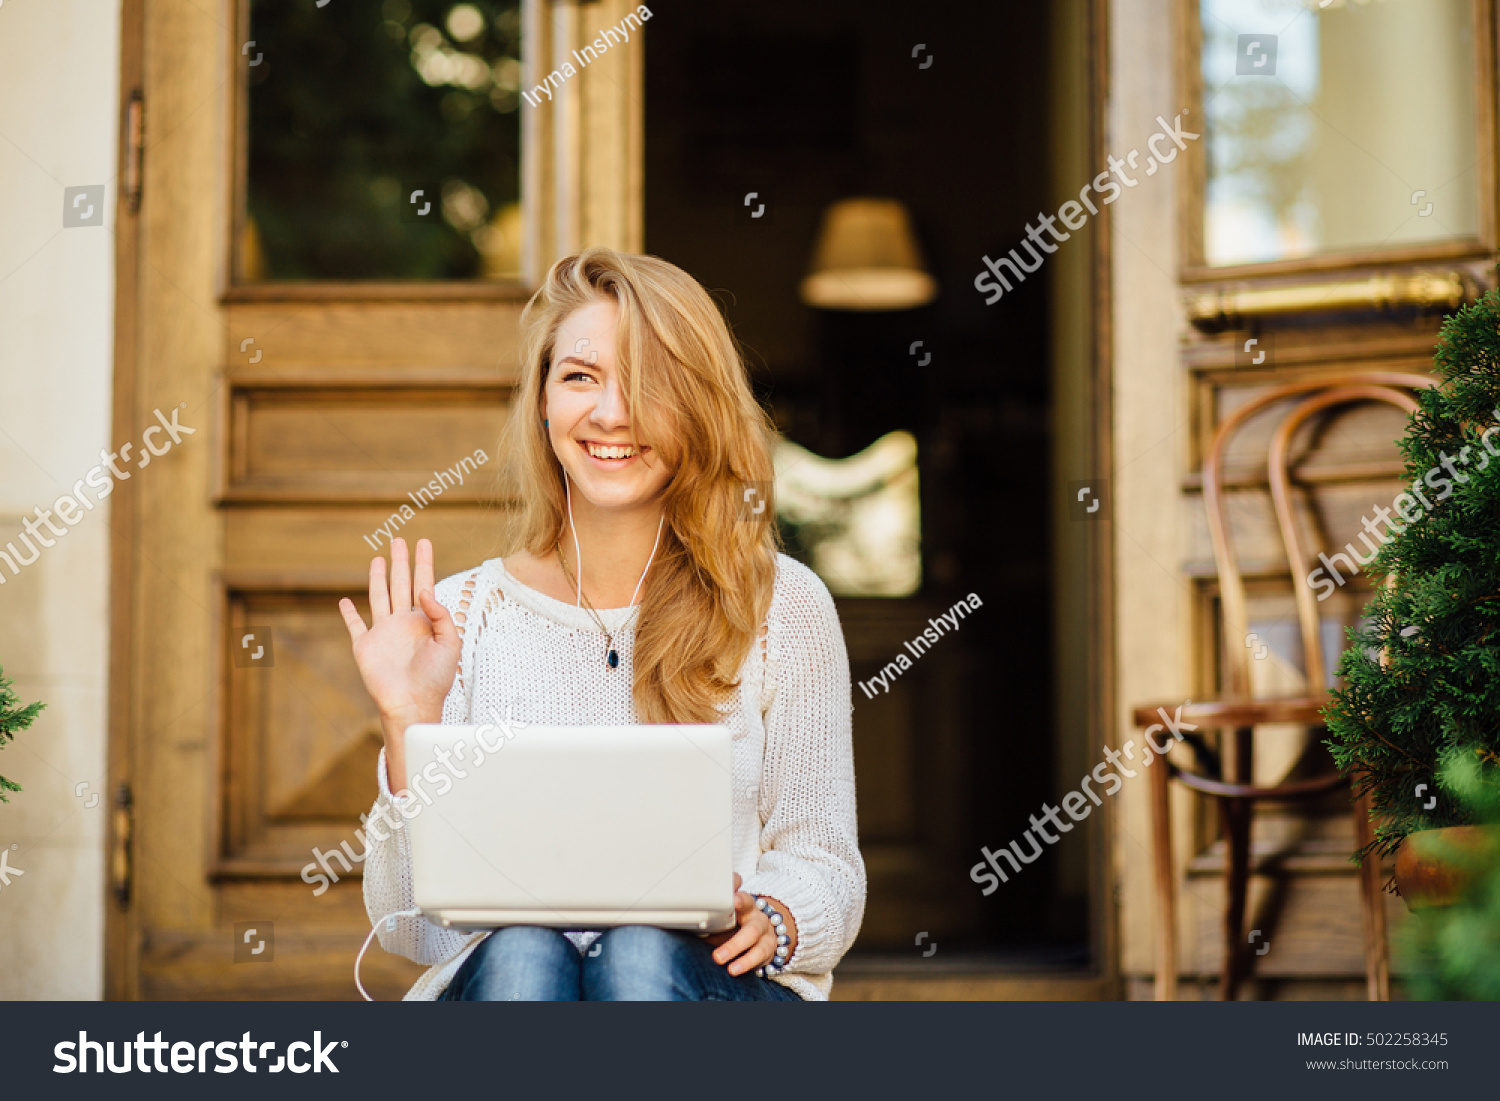 Portrait of a young woman smiling and saying hello in sunny morning #502258345